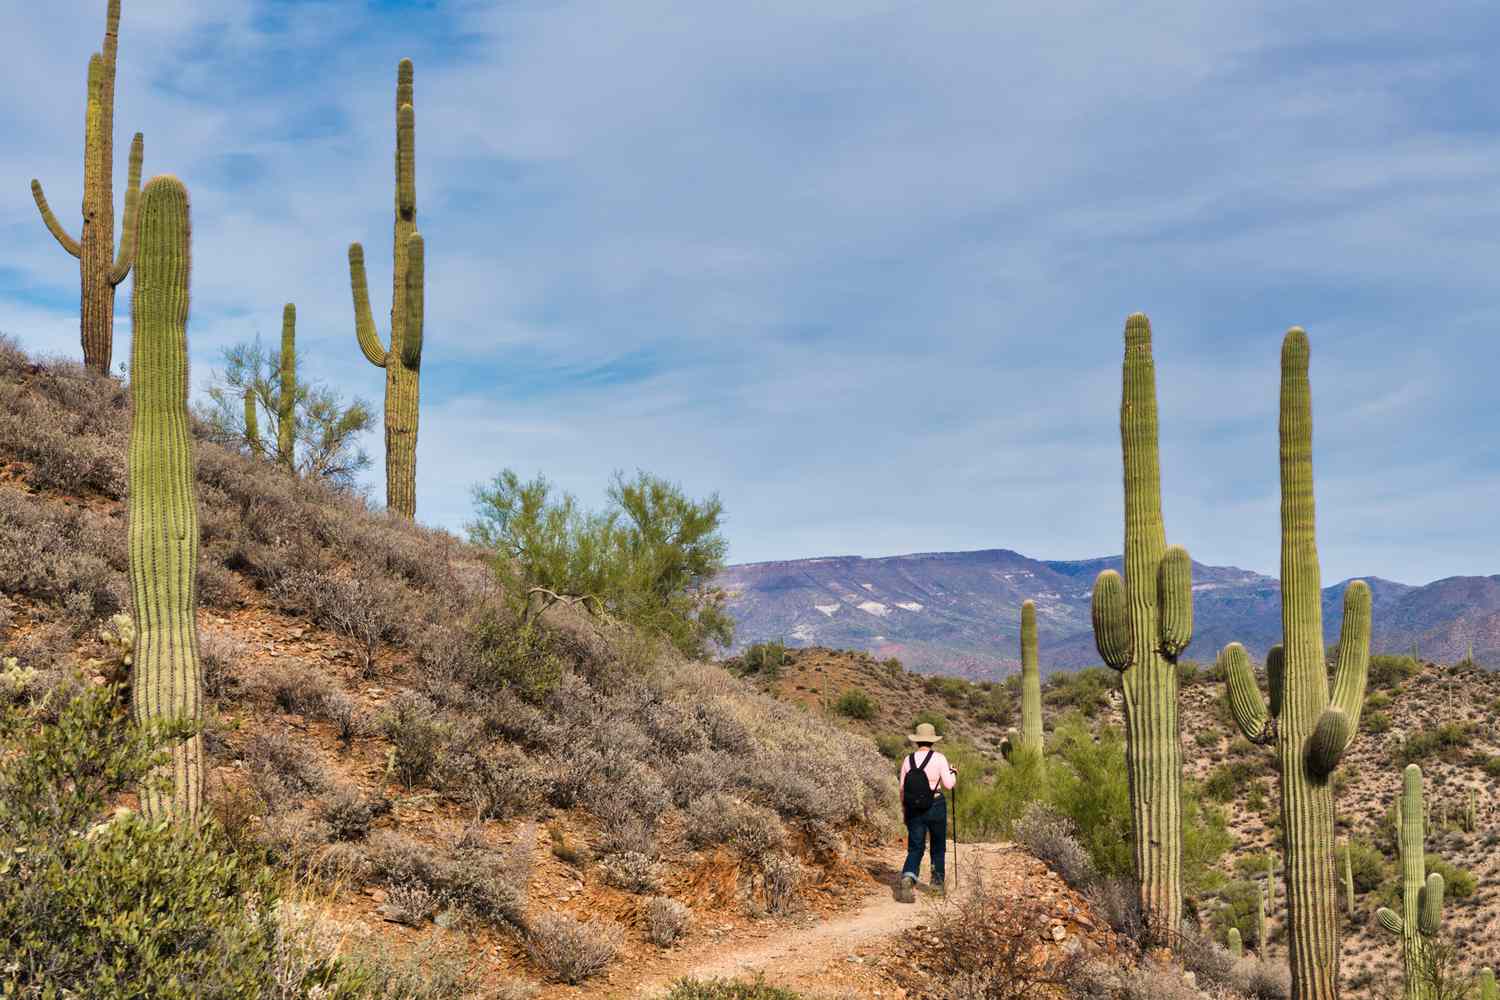 Overton Trail Loop is a 3.5 mile heavily trafficked loop trail located near Cave Creek, of the city of Phoenix Arizona